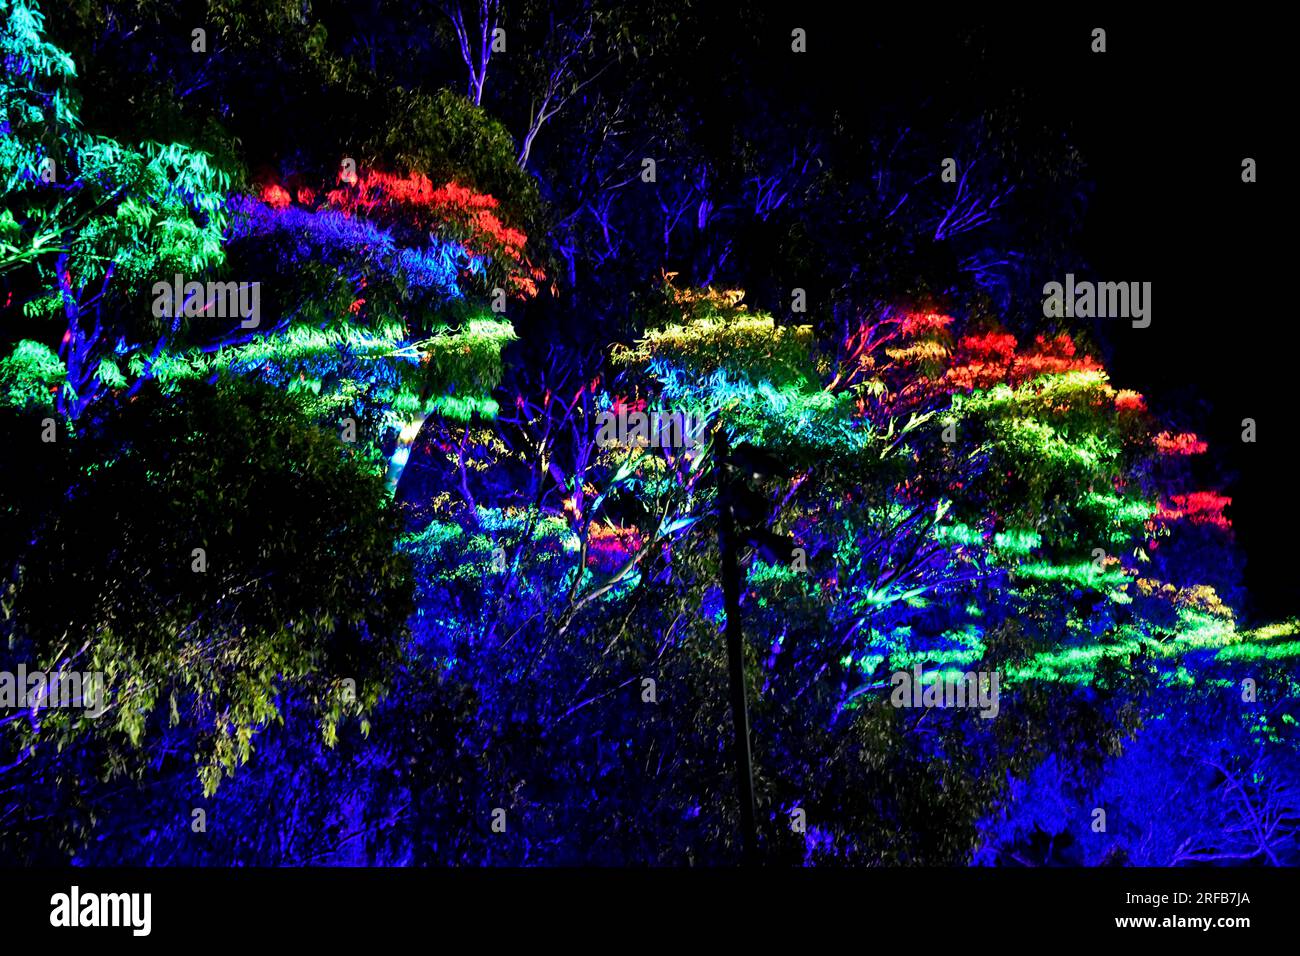 LIT Colourful Laser Light Show Beaming Colorful Patterns Across Smokey Night Sky Werribee Melbourne Victoria Australia Stock Photo